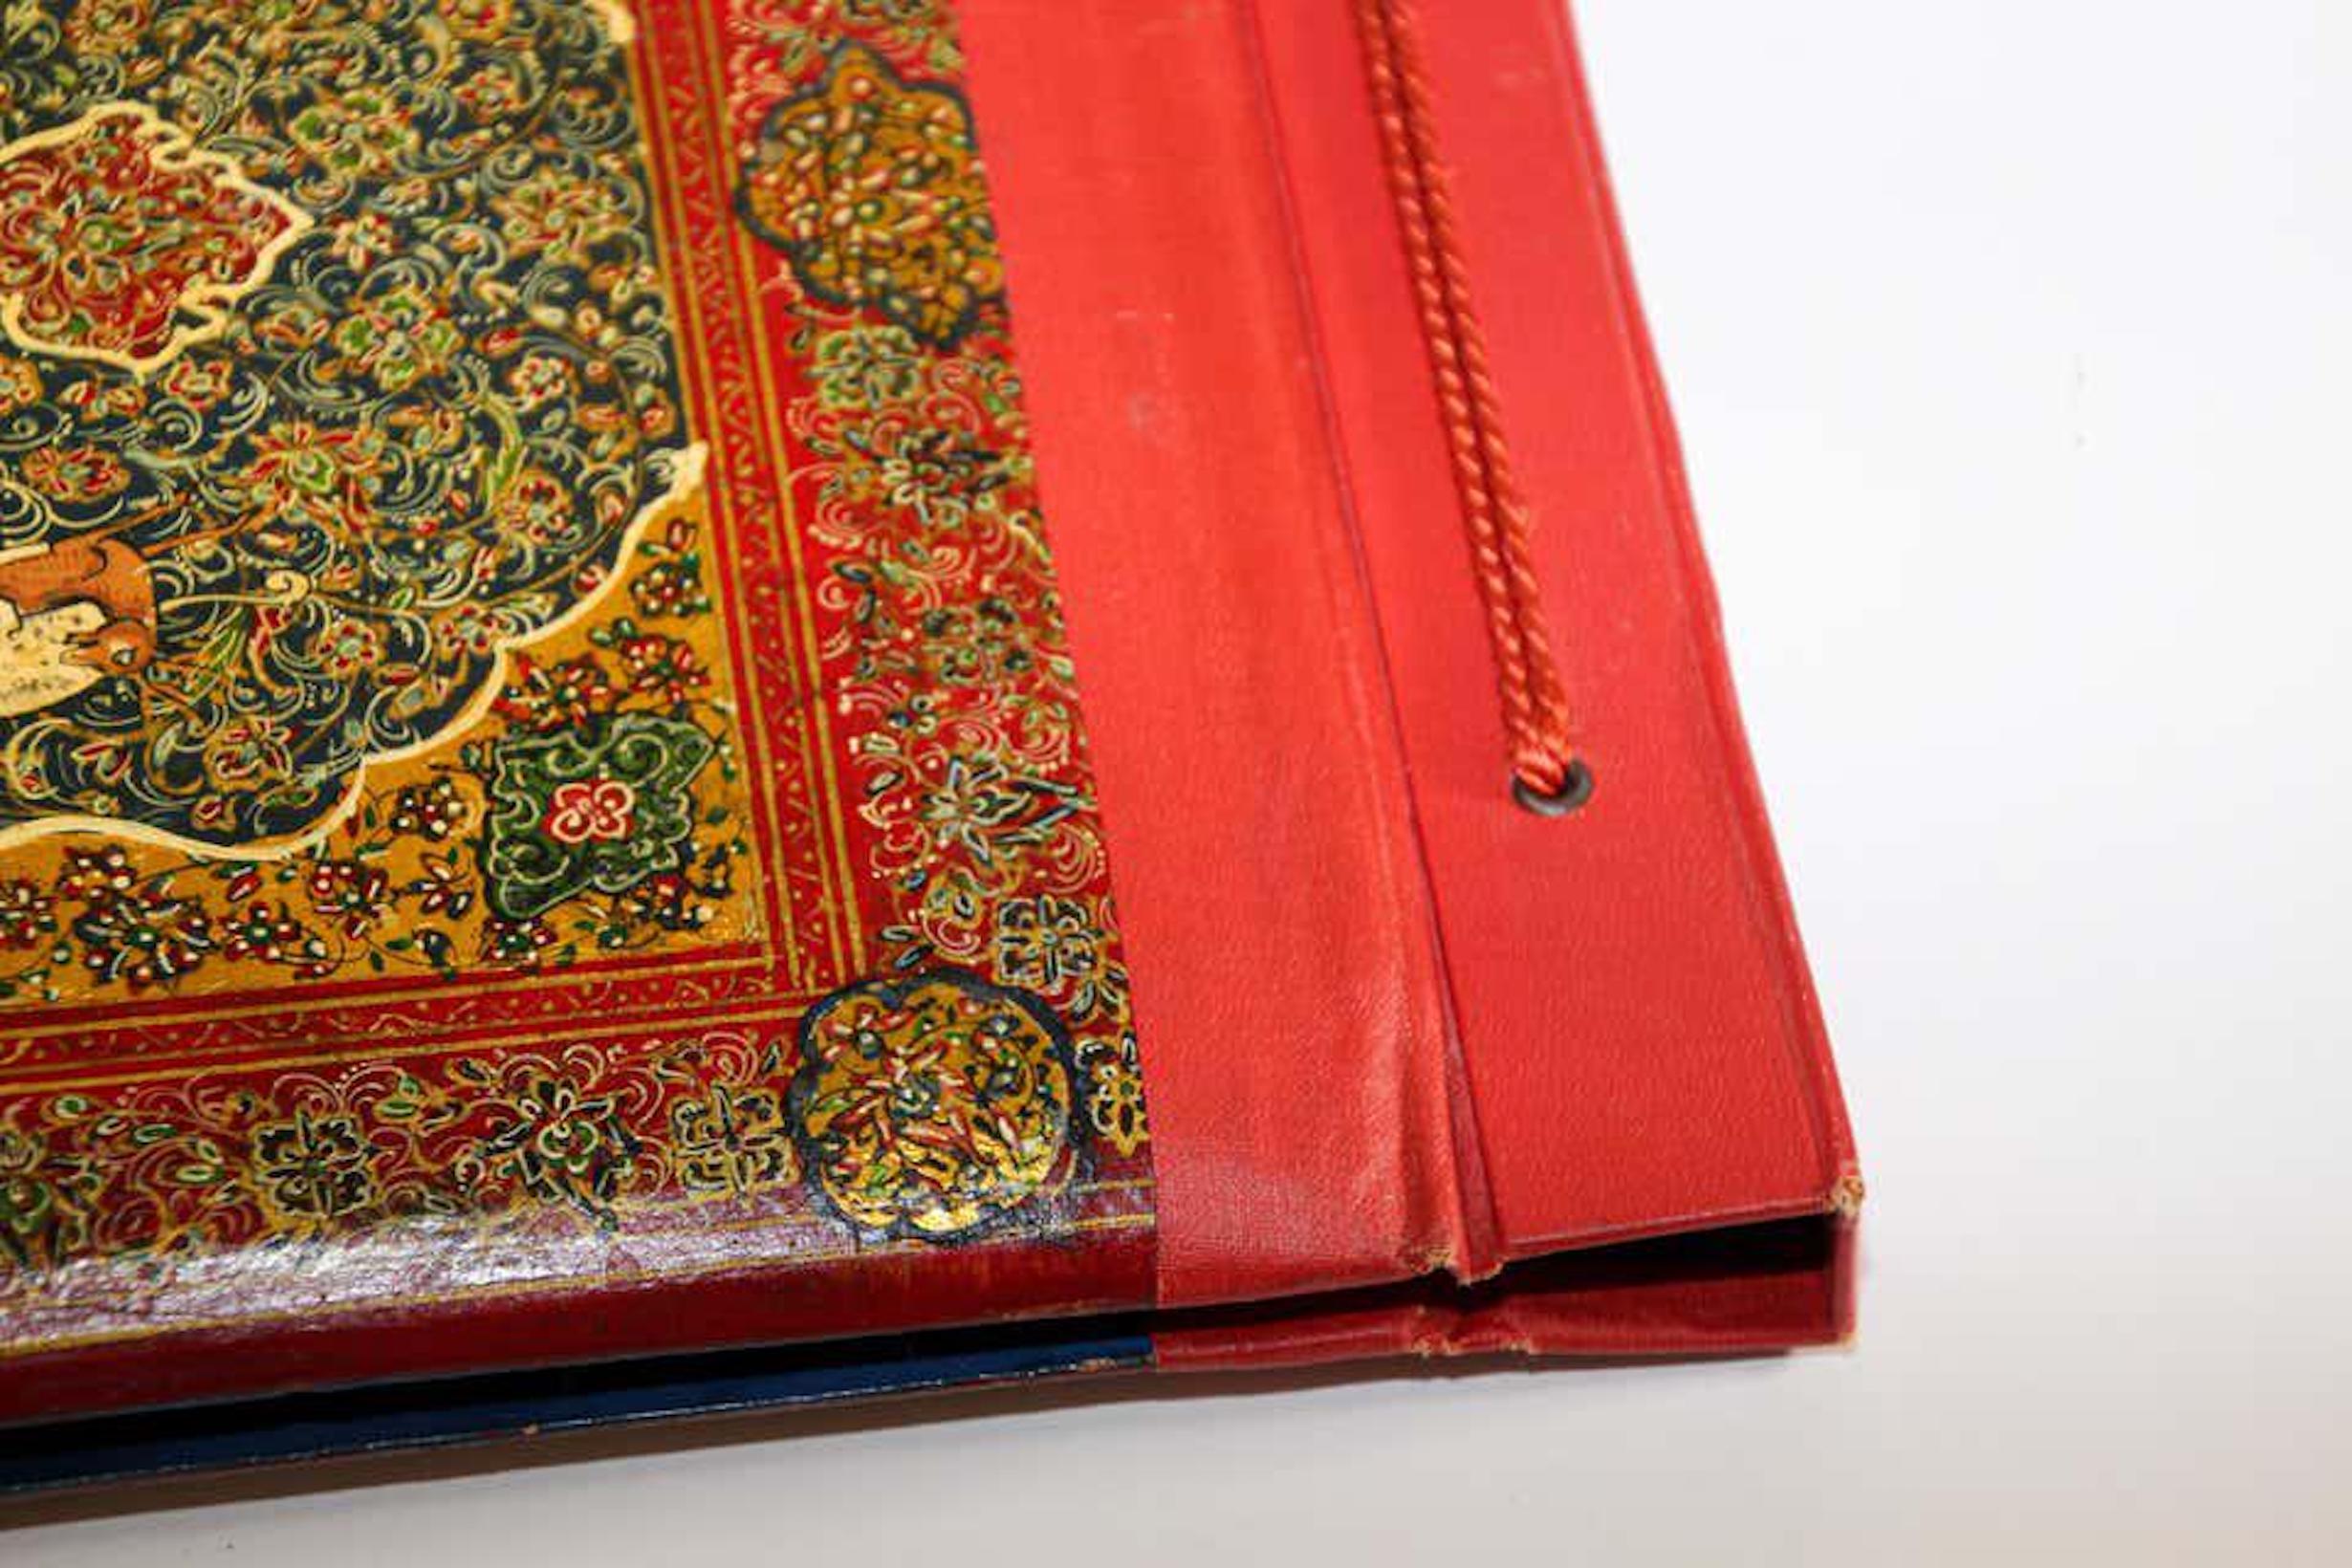 Hand Painted Middle Eastern Moorish Style Photo Album, 19th Century For Sale 1